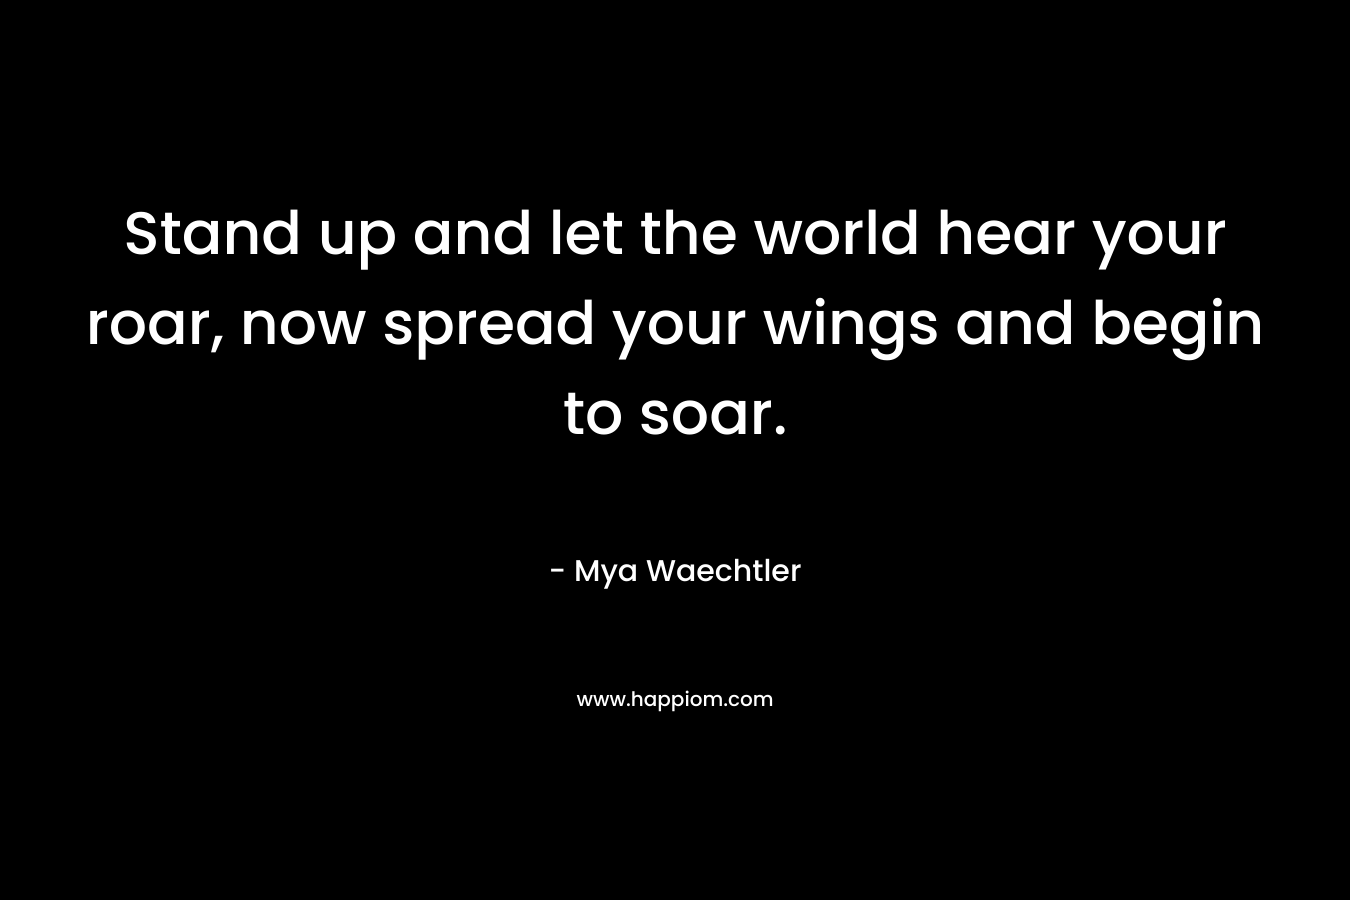 Stand up and let the world hear your roar, now spread your wings and begin to soar. – Mya Waechtler